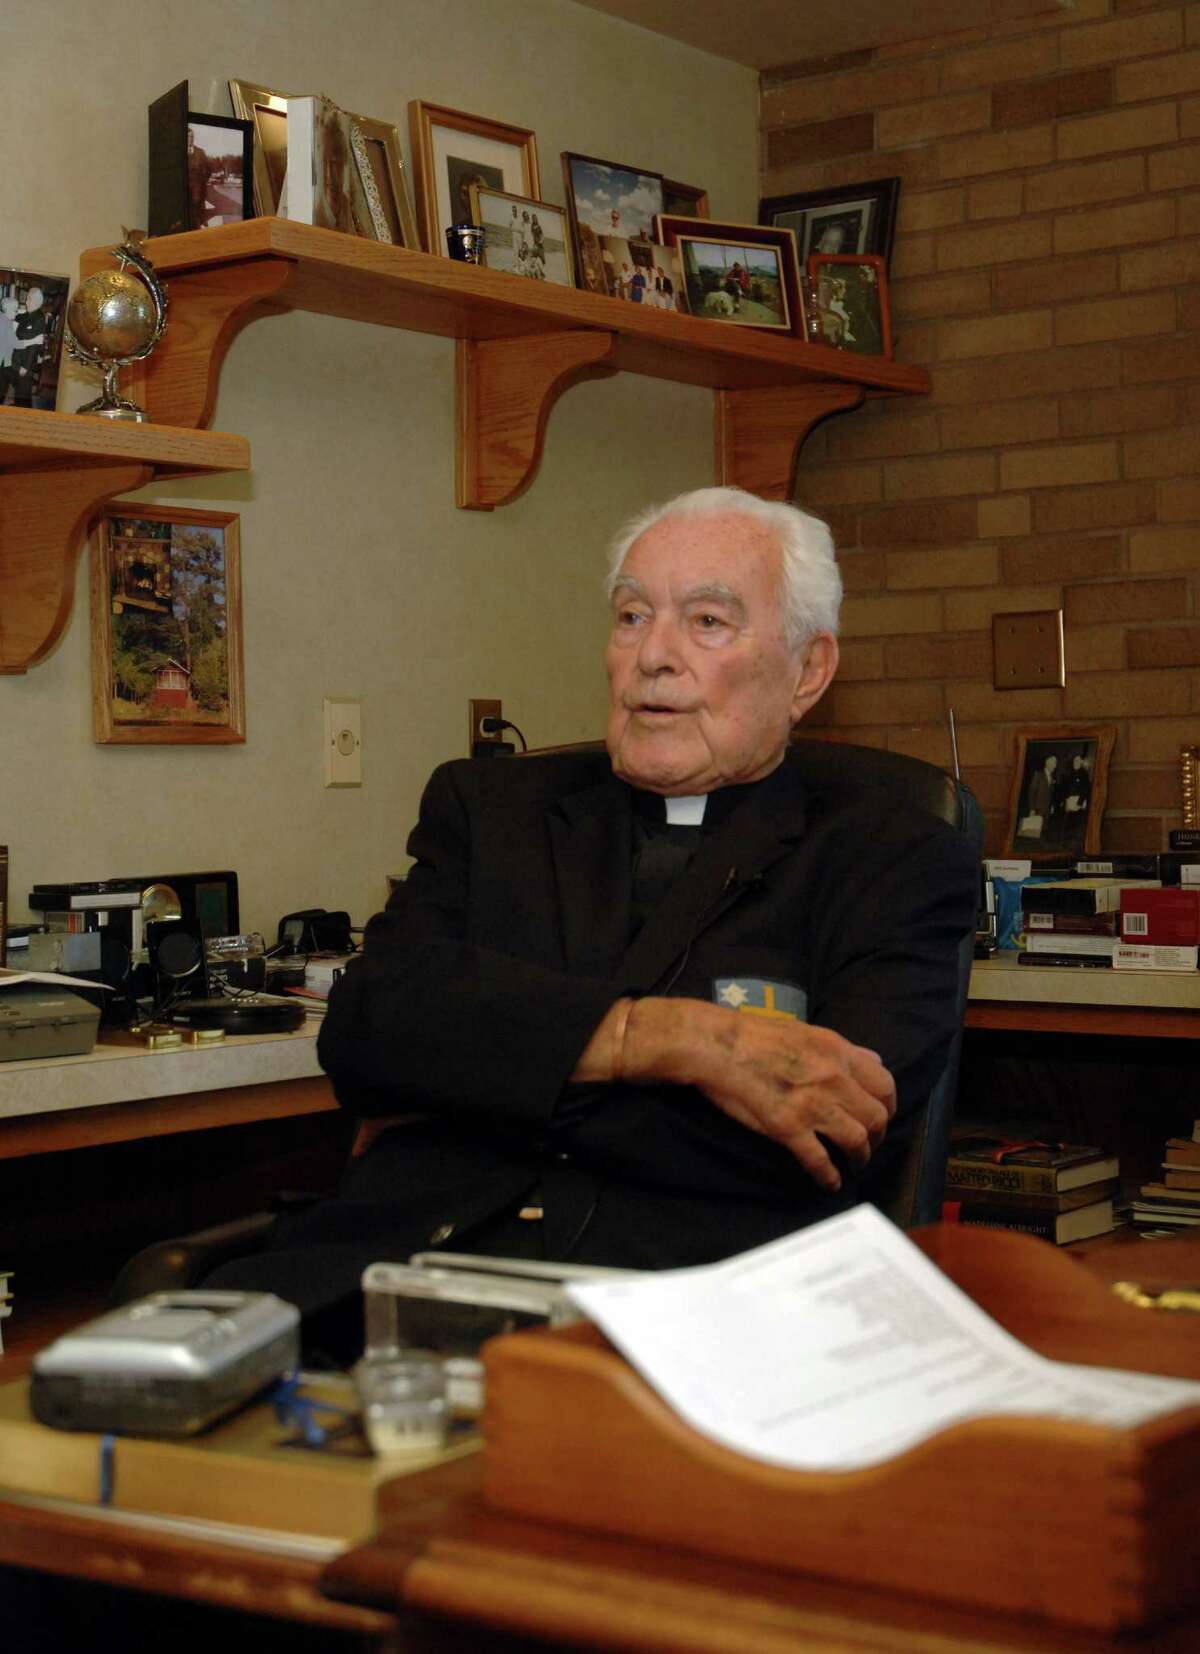 ** APN ADVANCE FOR SUNDAY, OCT. 28 **The Rev. Theodore Hesburgh, C.S.C, president emeritus of the University of Notre Dame, talks about his experiences over 90 years of life at his desk in the Hesburgh Library on the campus of the University of Notre Dame in South Bend, Ind., Monday, Sept. 24, 2007. (AP Photo/Joe Raymond) Ran on: 10-28-2007 The Rev. Theodore Hesburgh spent 35 years leading the University of Notre Dame, traveling the world serving presidents and popes.